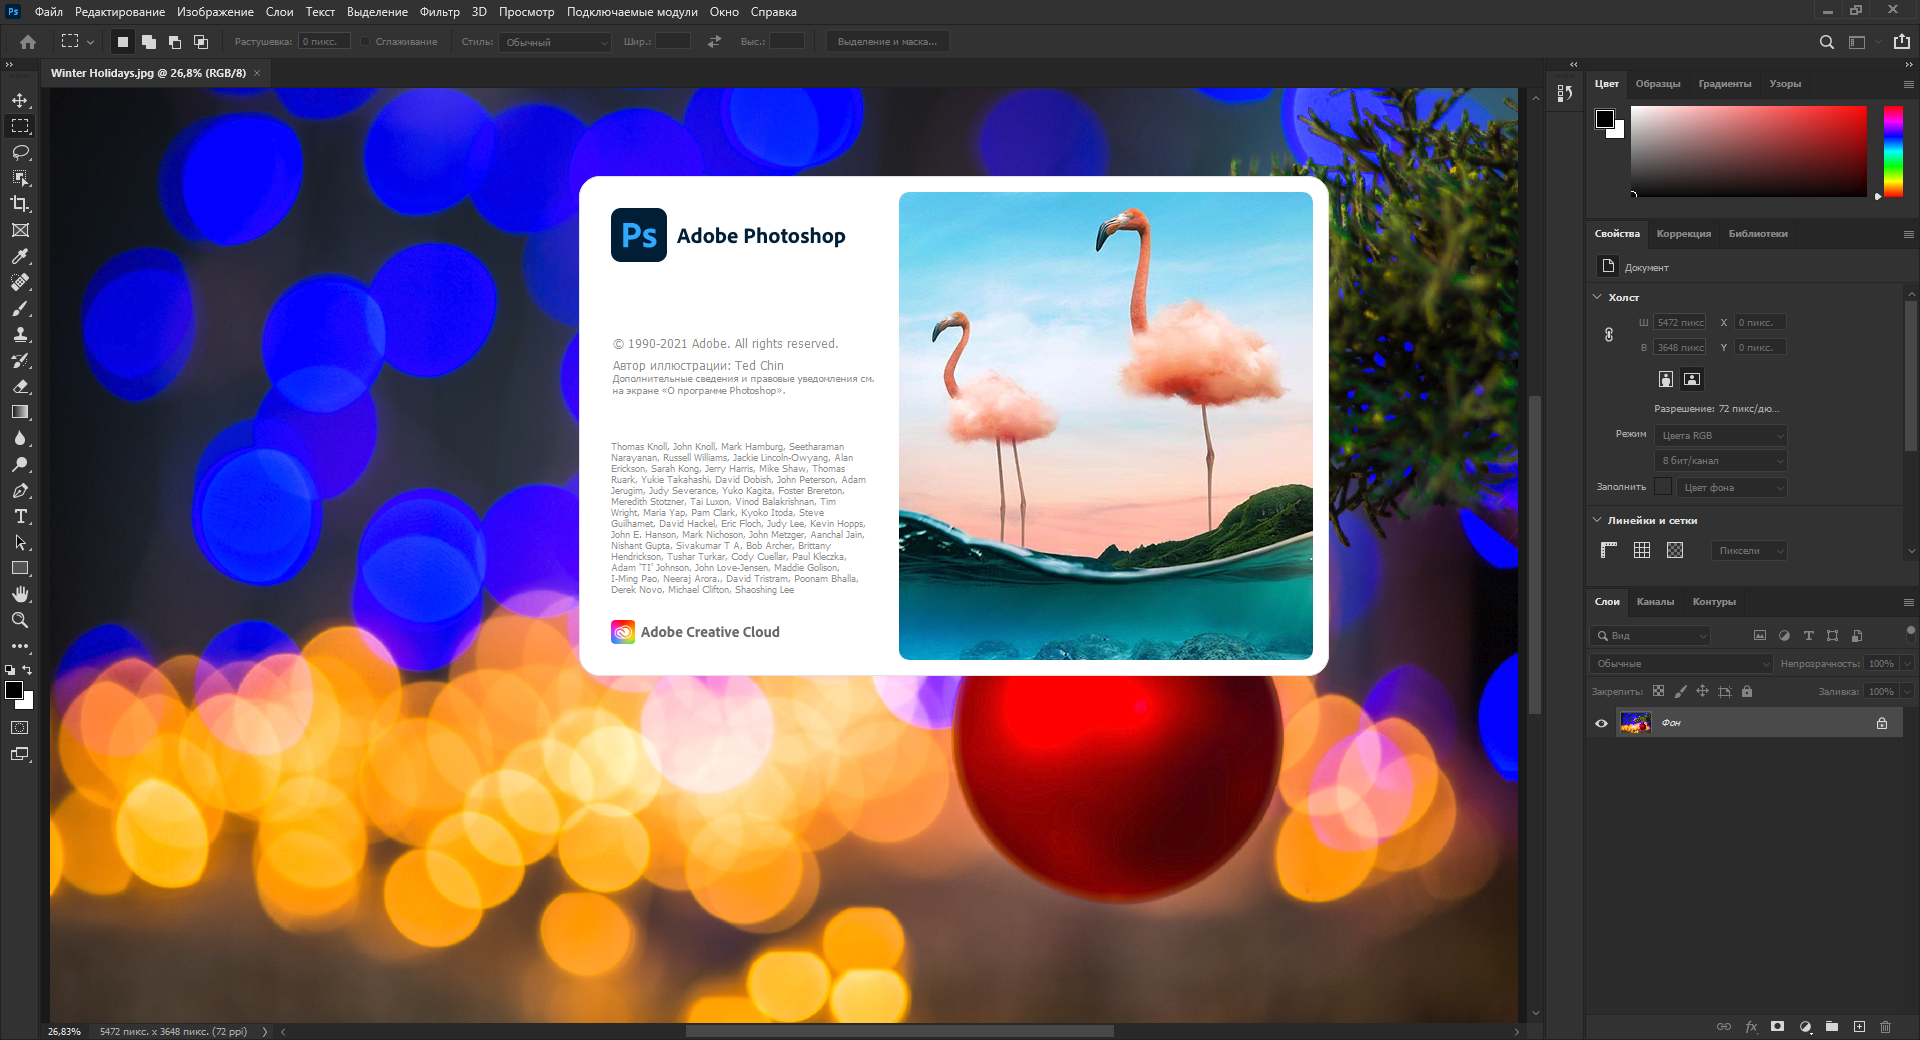 Photoshop 2021 (Version 22.5)  Download free With Activation Code Full Version 2023